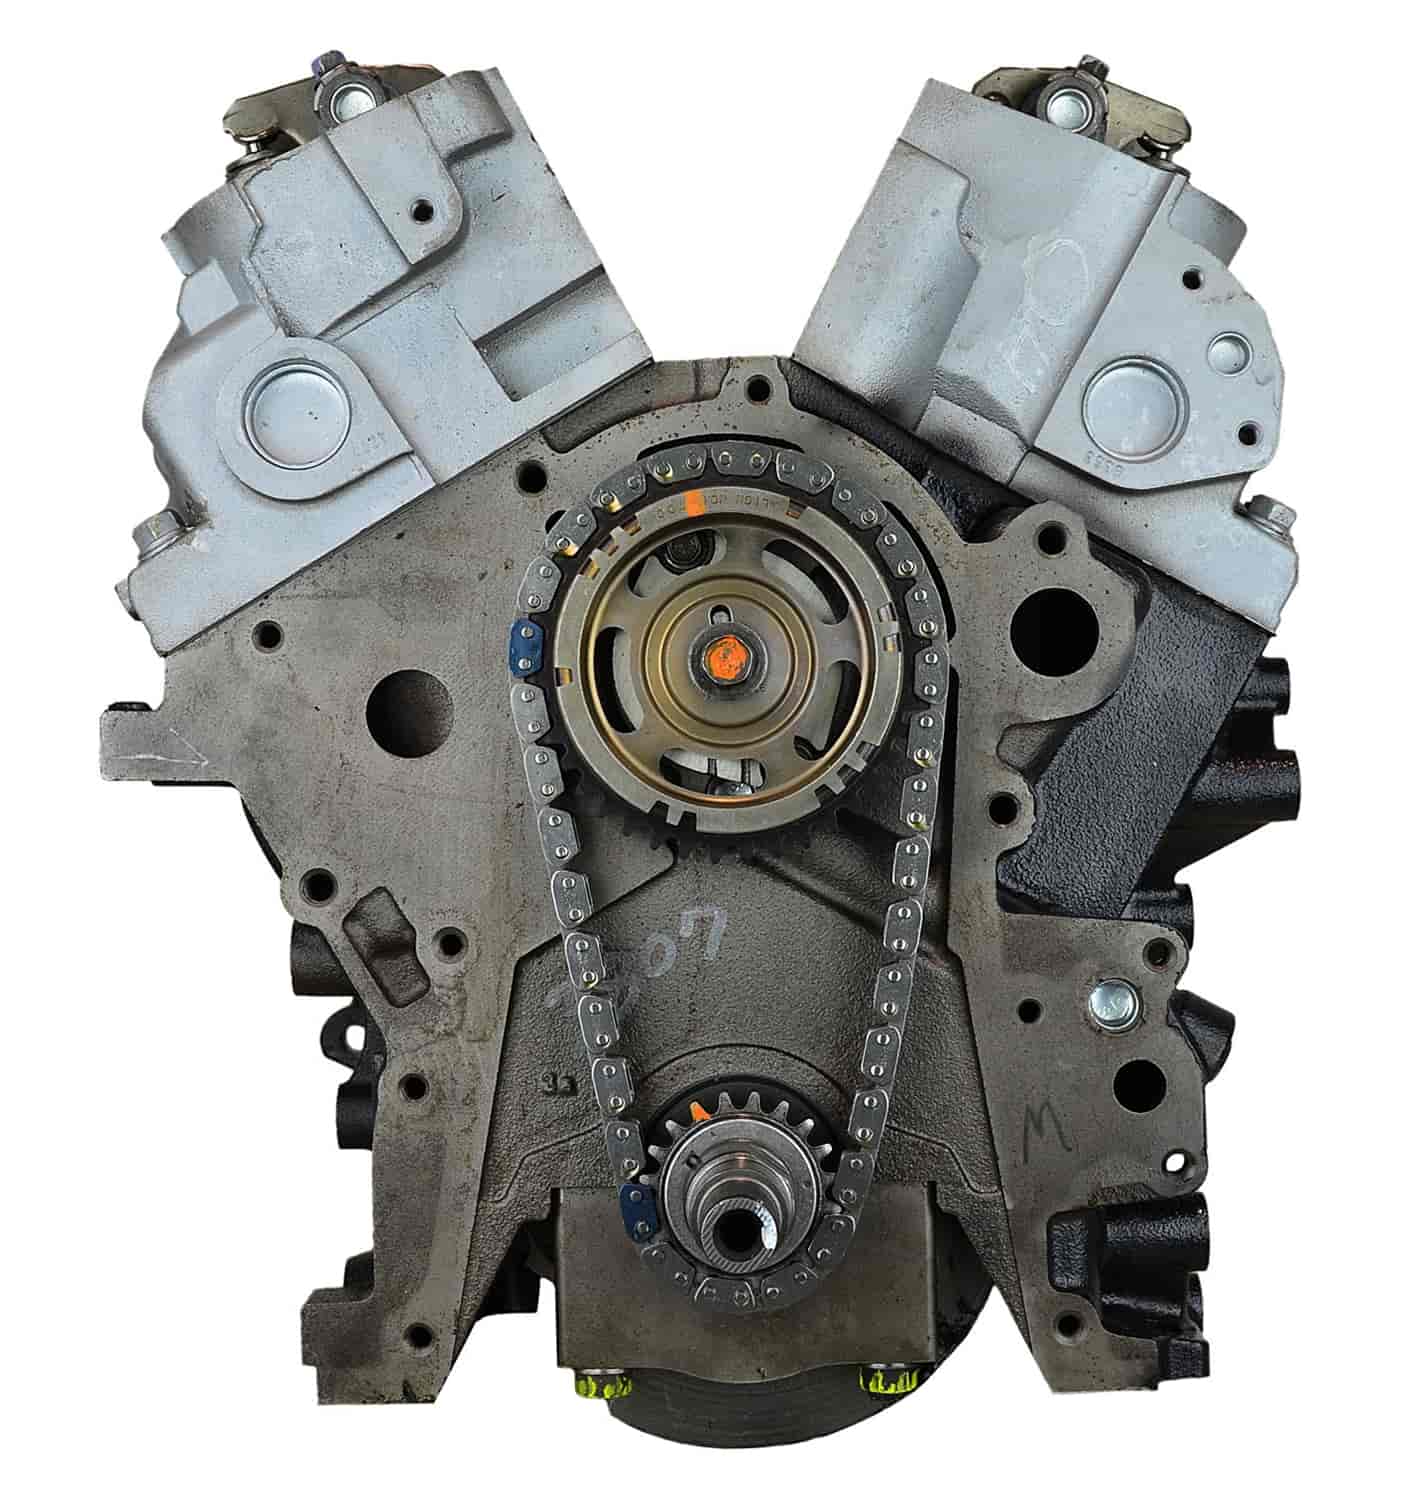 Remanufactured Crate Engine for 2007-2008 Chrysler Pacifica with 3.8L V6